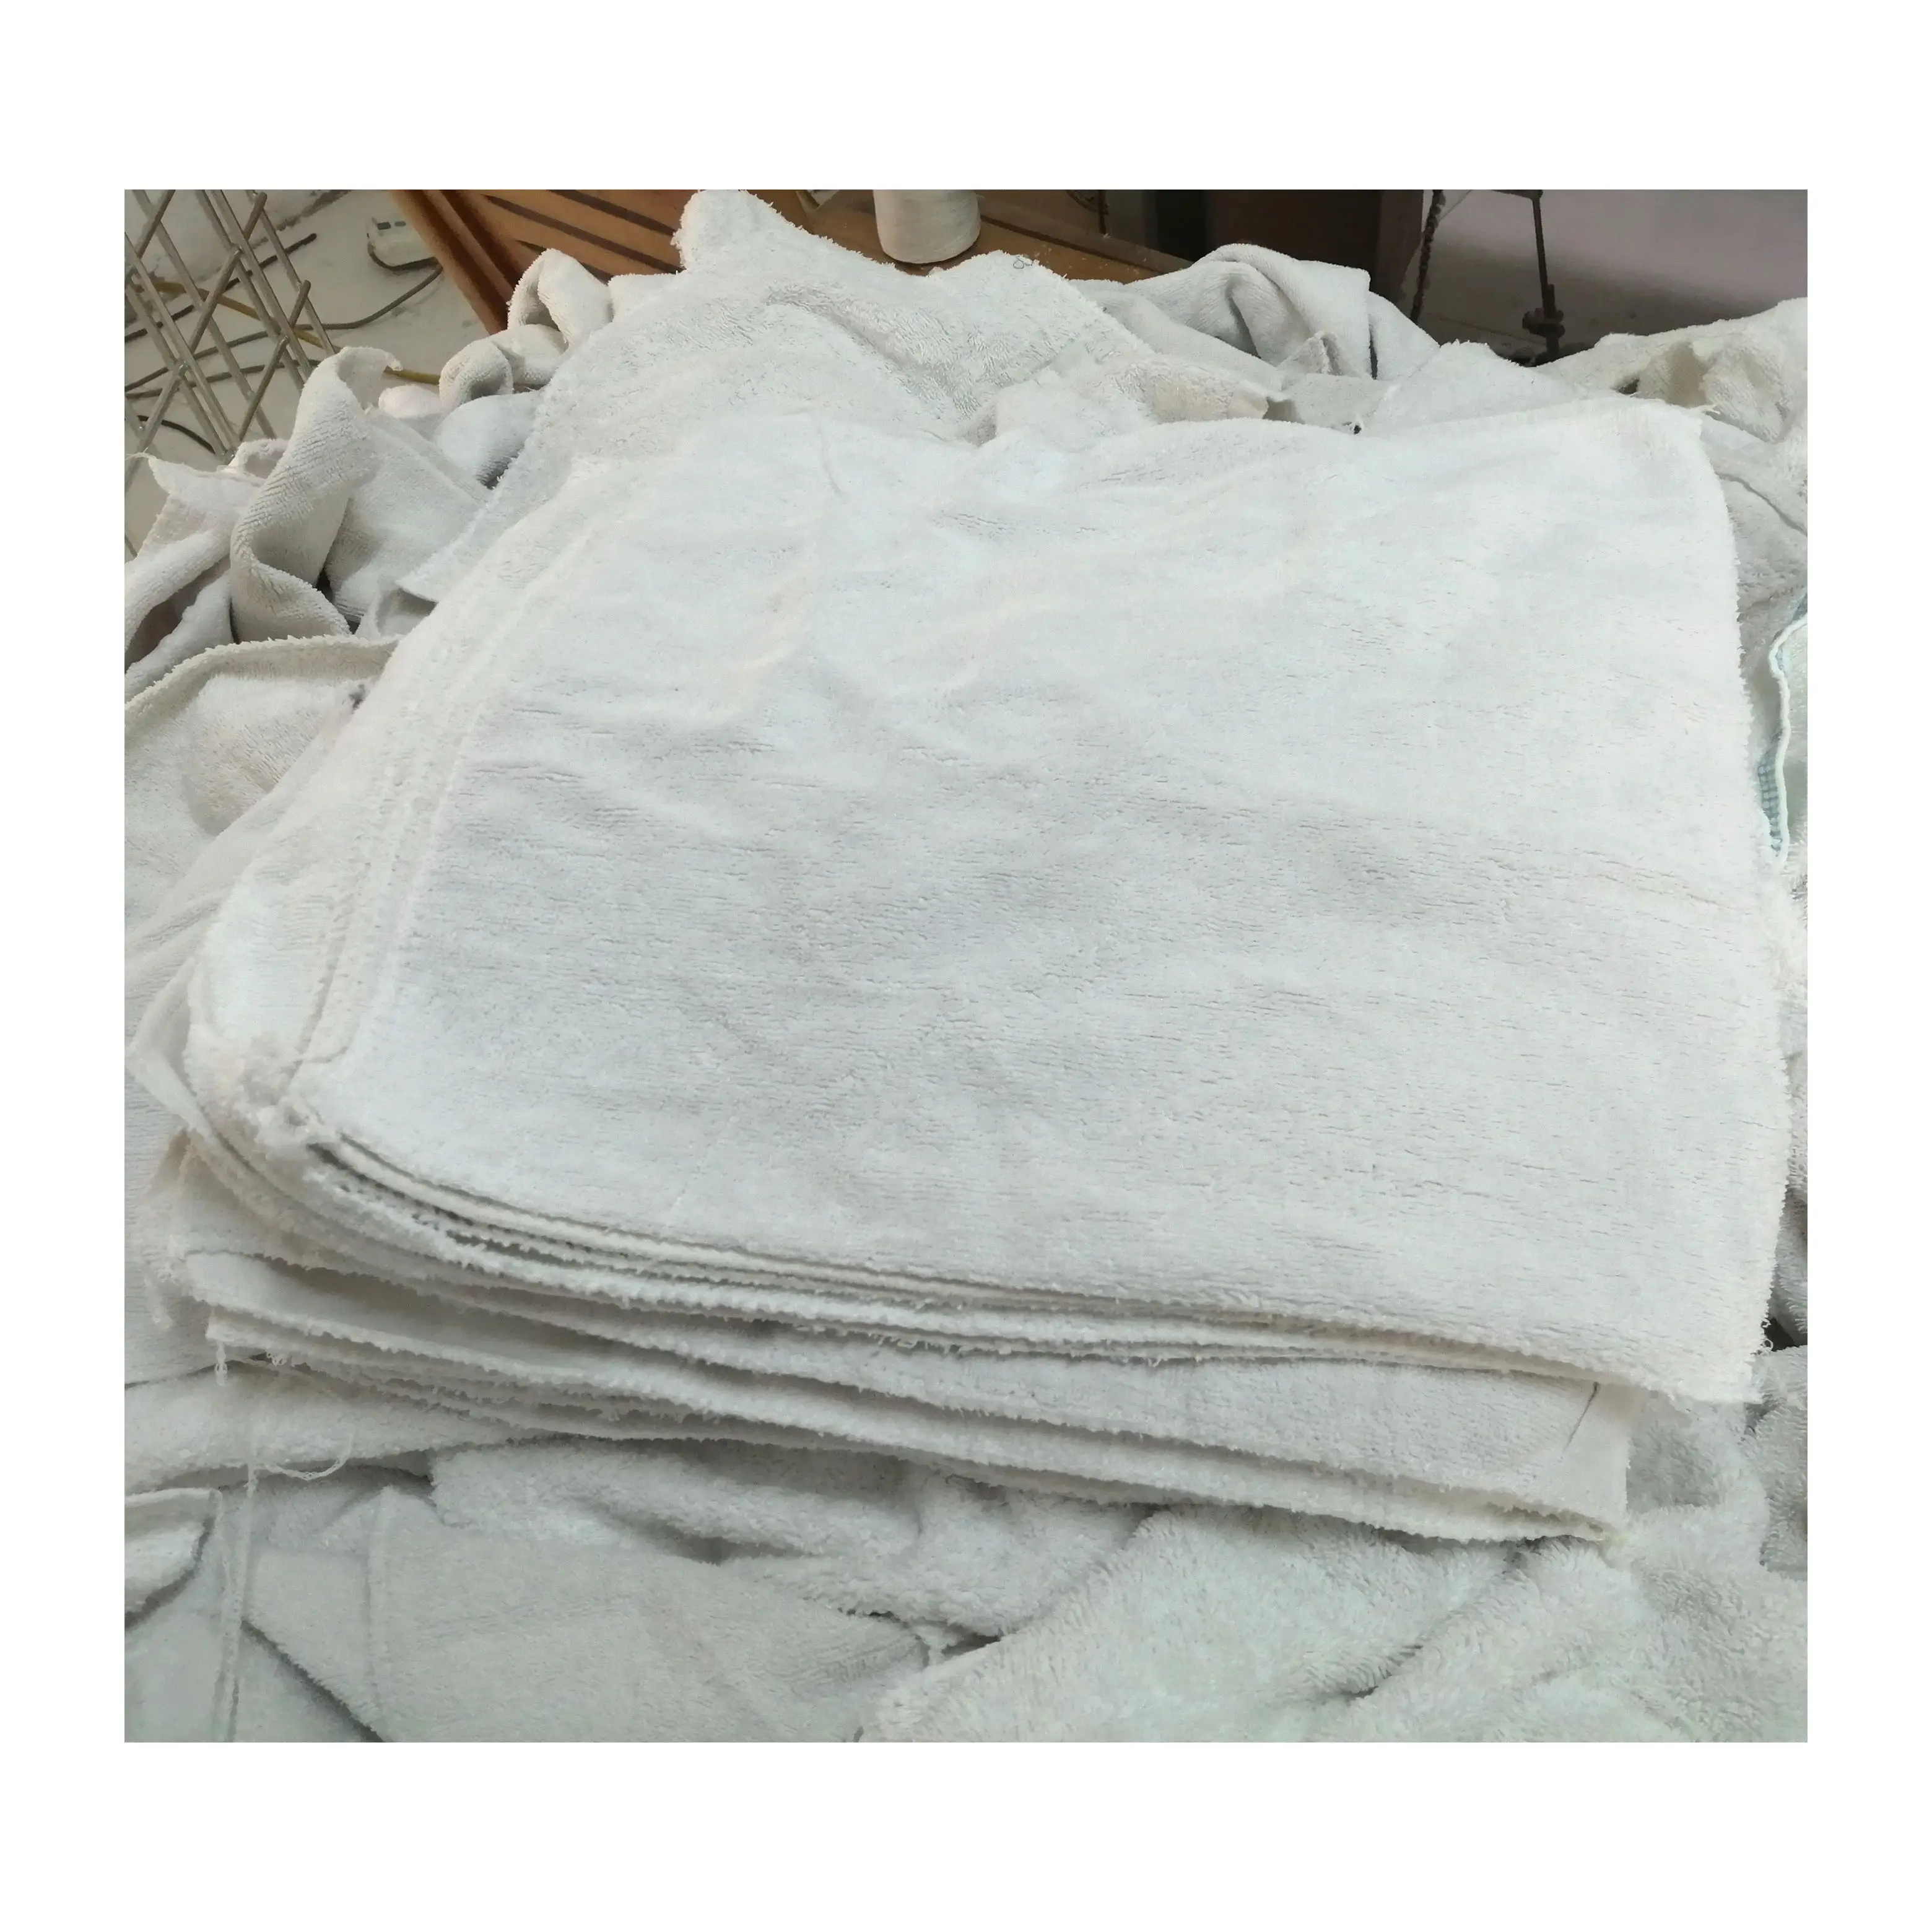 Hot selling recycled industrial cleaning wiping rags 10KG bale used bath towel white cotton rags